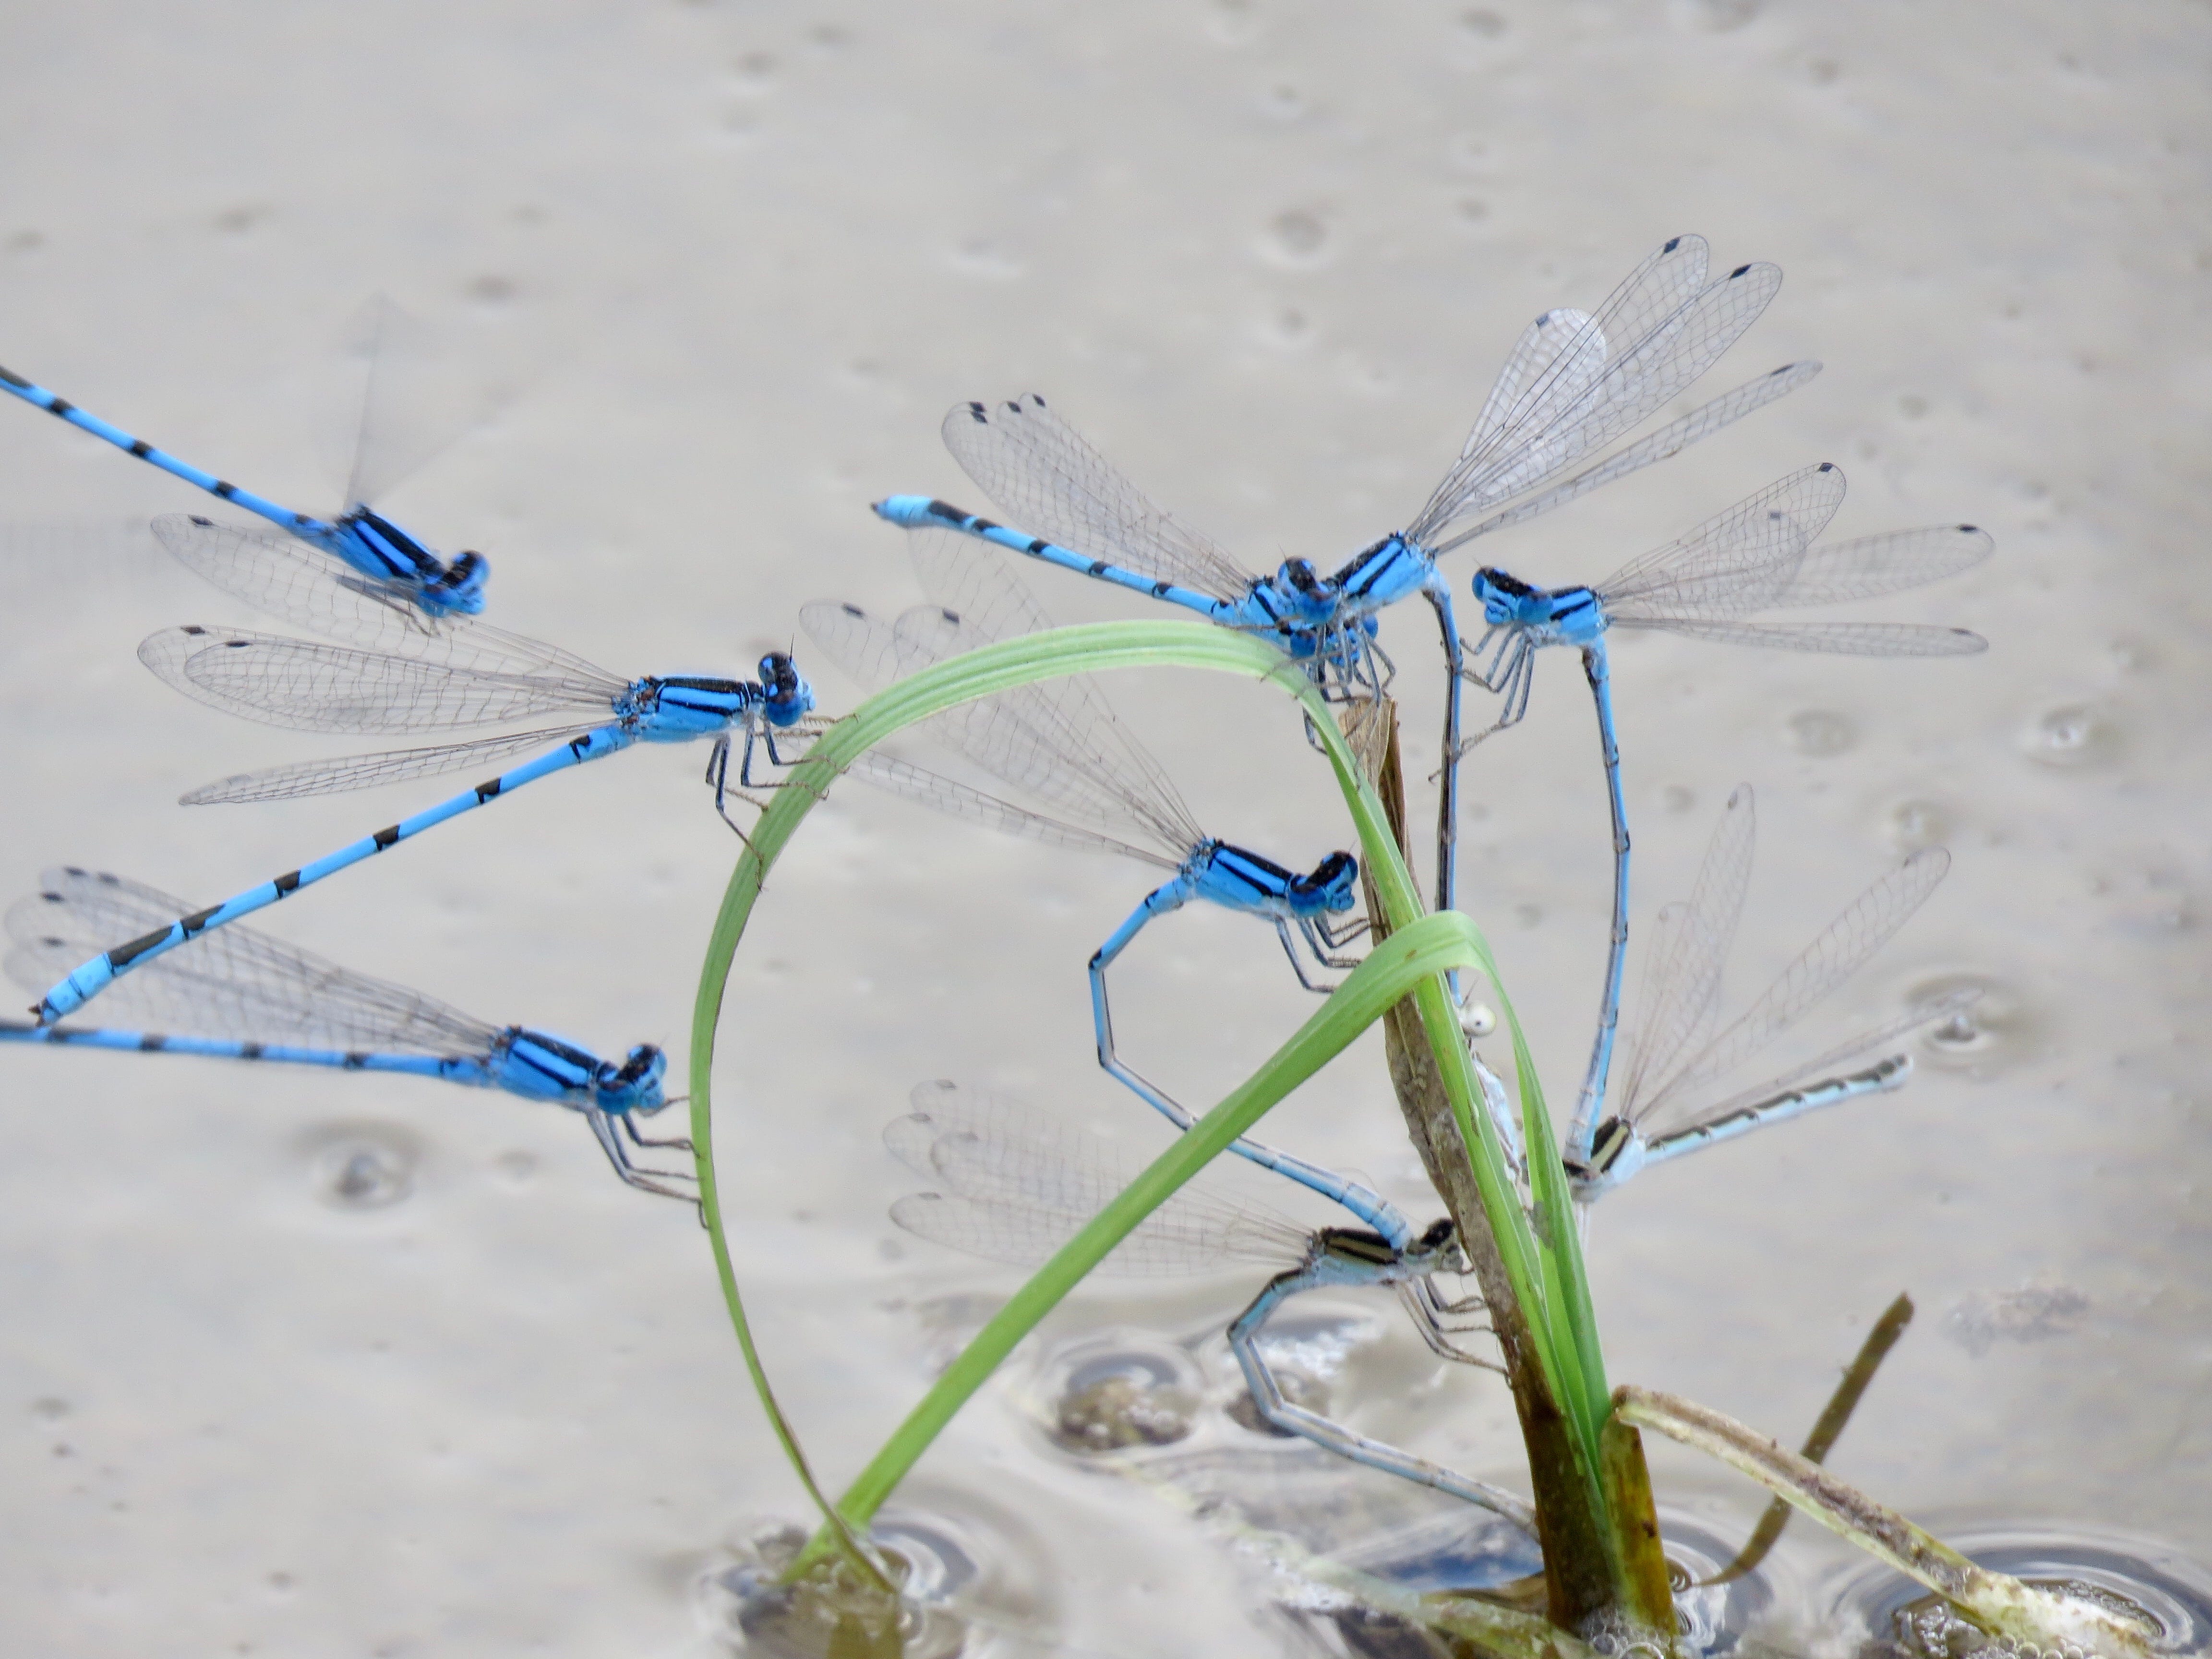 A group of bluet damselflies swarm on a plant protruding from the Santa Cruz River in September 2019.